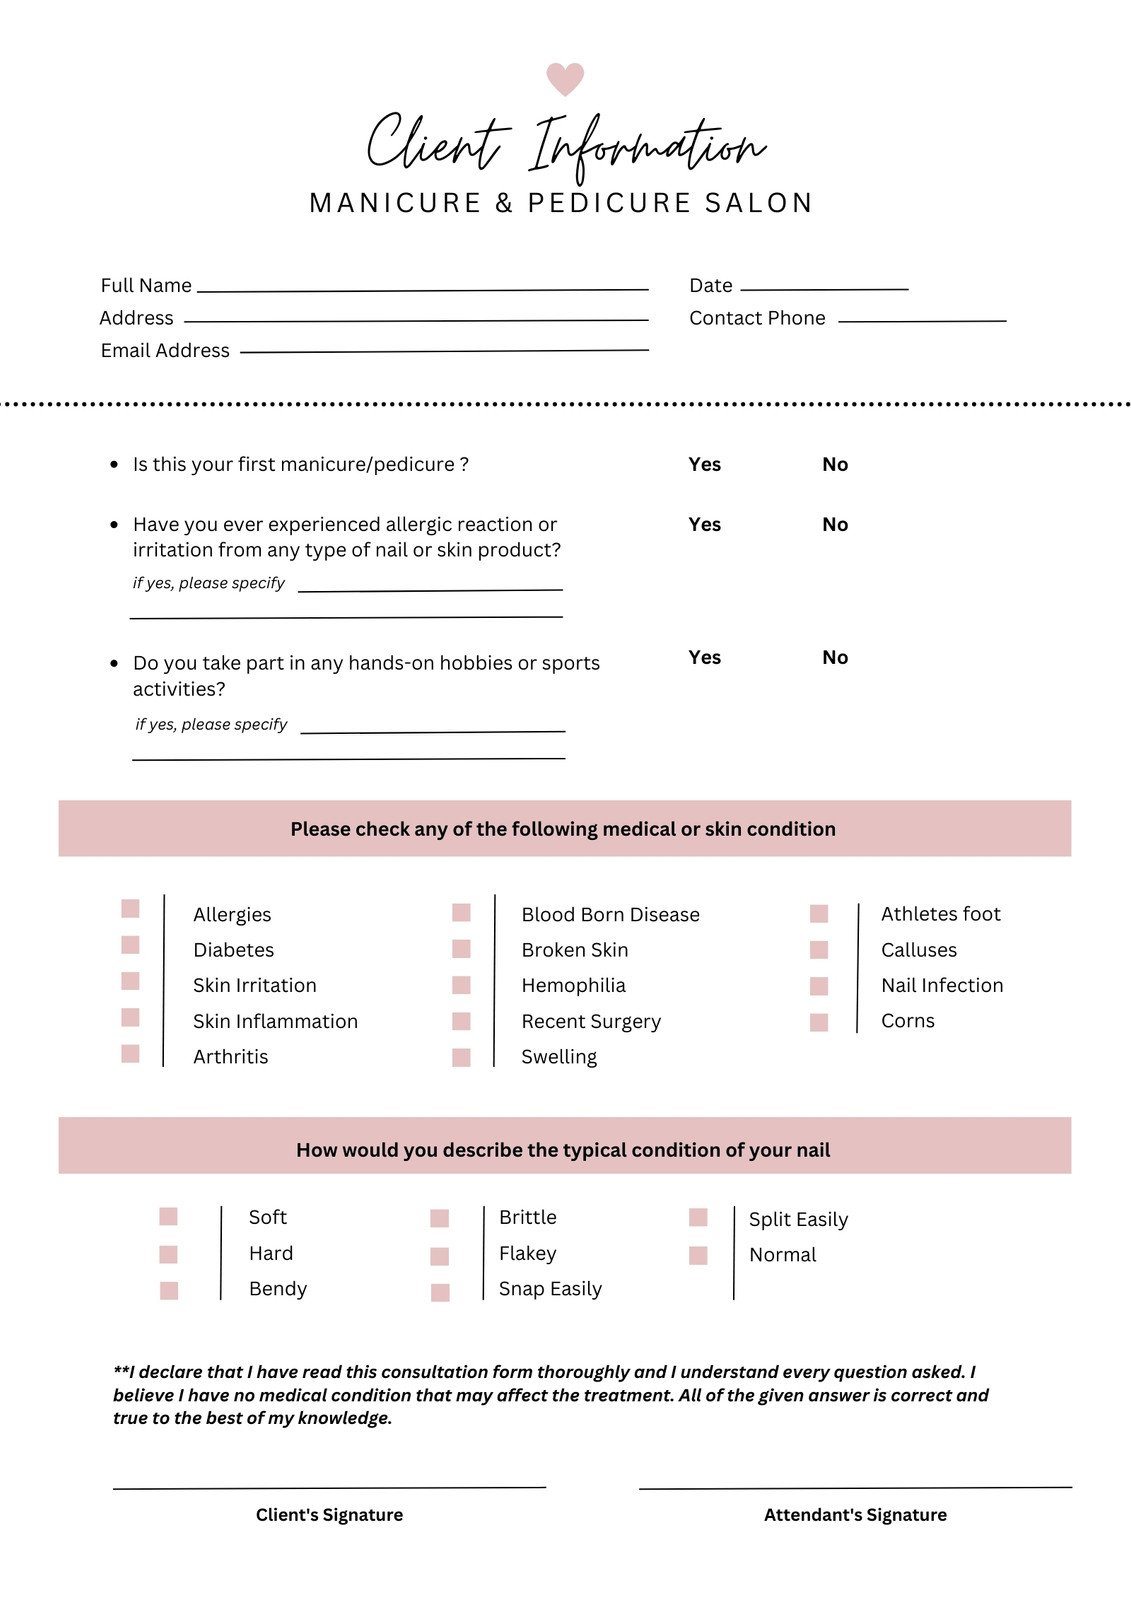 Free form document templates to customize and print